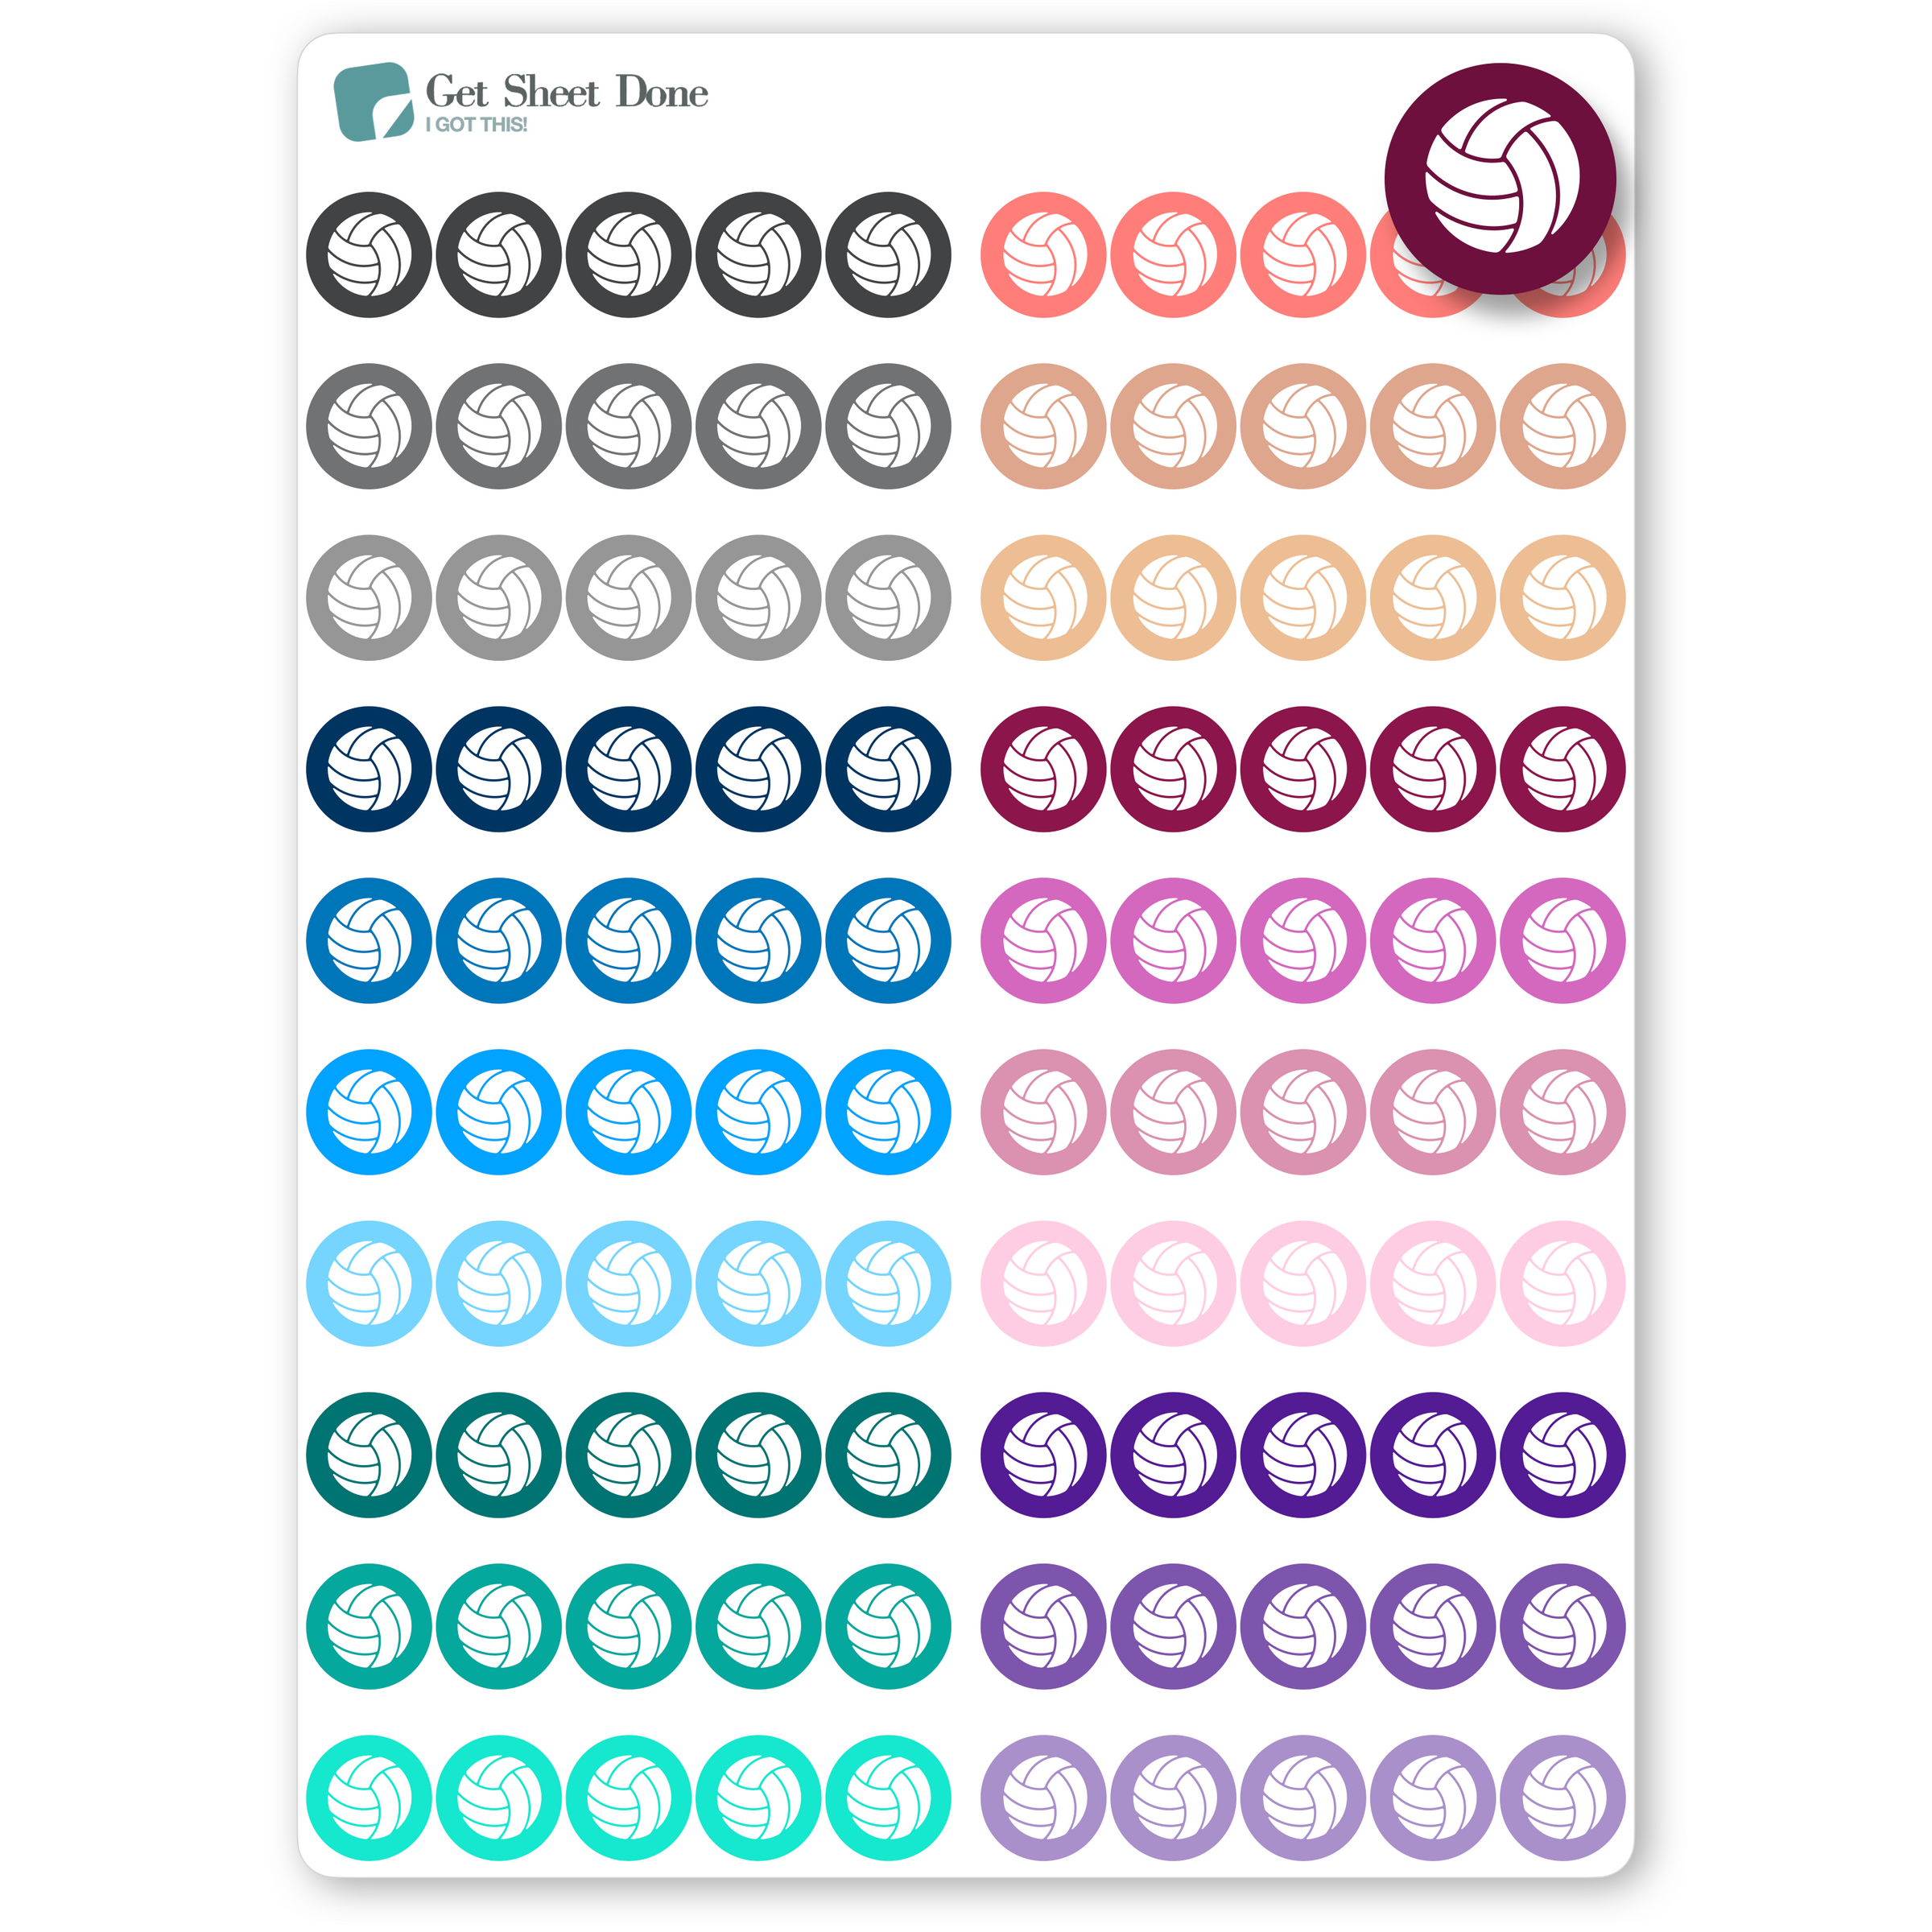 Volleyball Dot Planner Stickers / Bullet Journaling / Bujo / Essential Productivity Stickers